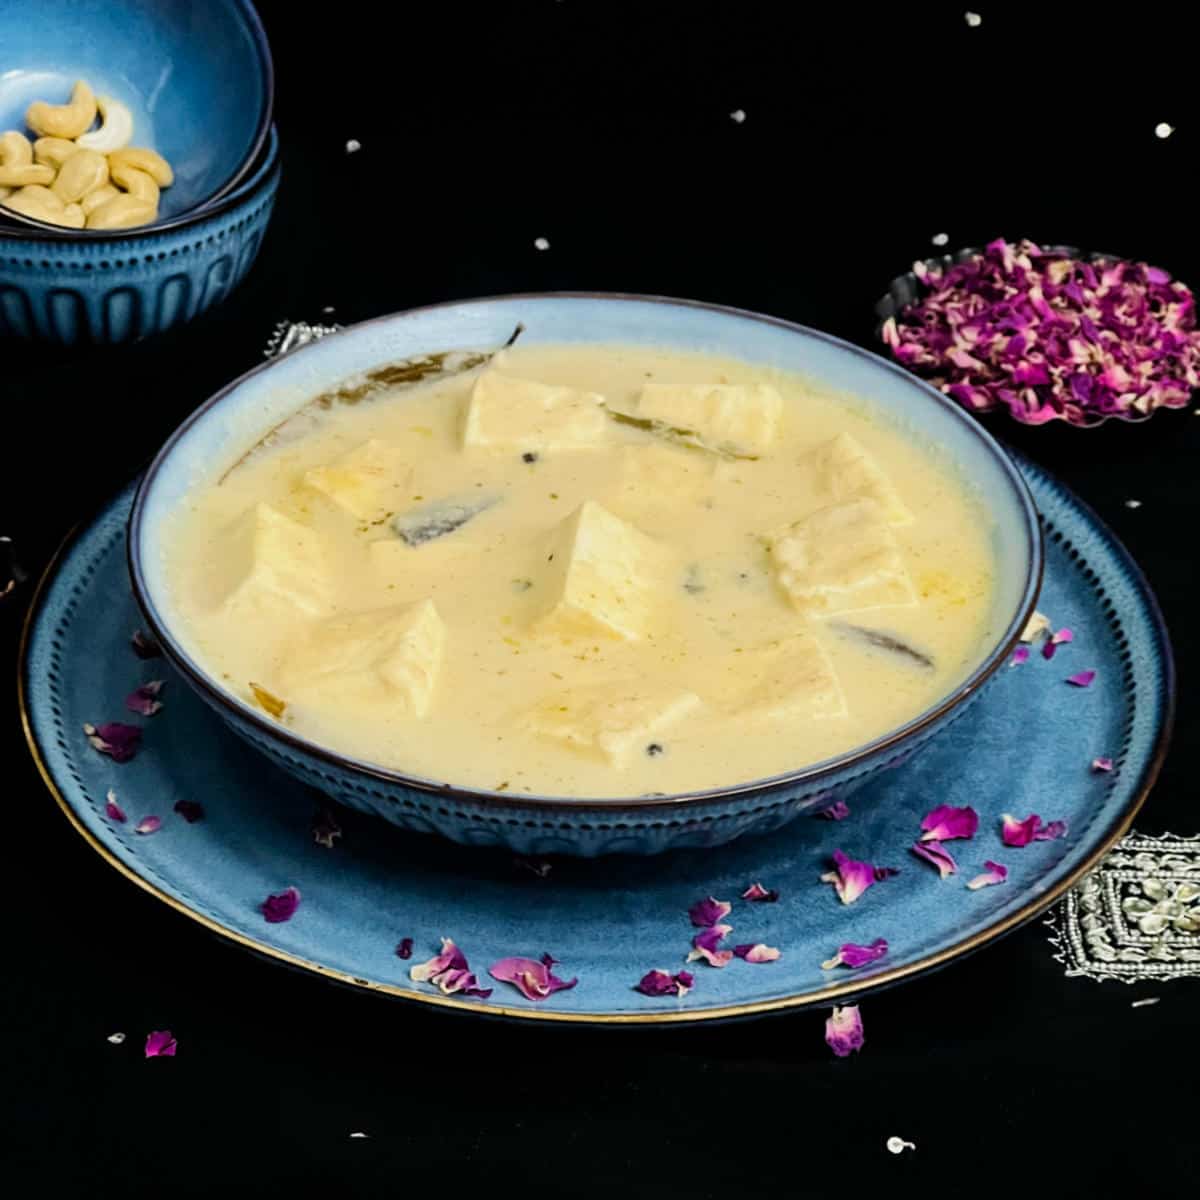 Restaurant style shahi paneer placed in a blue bowl.